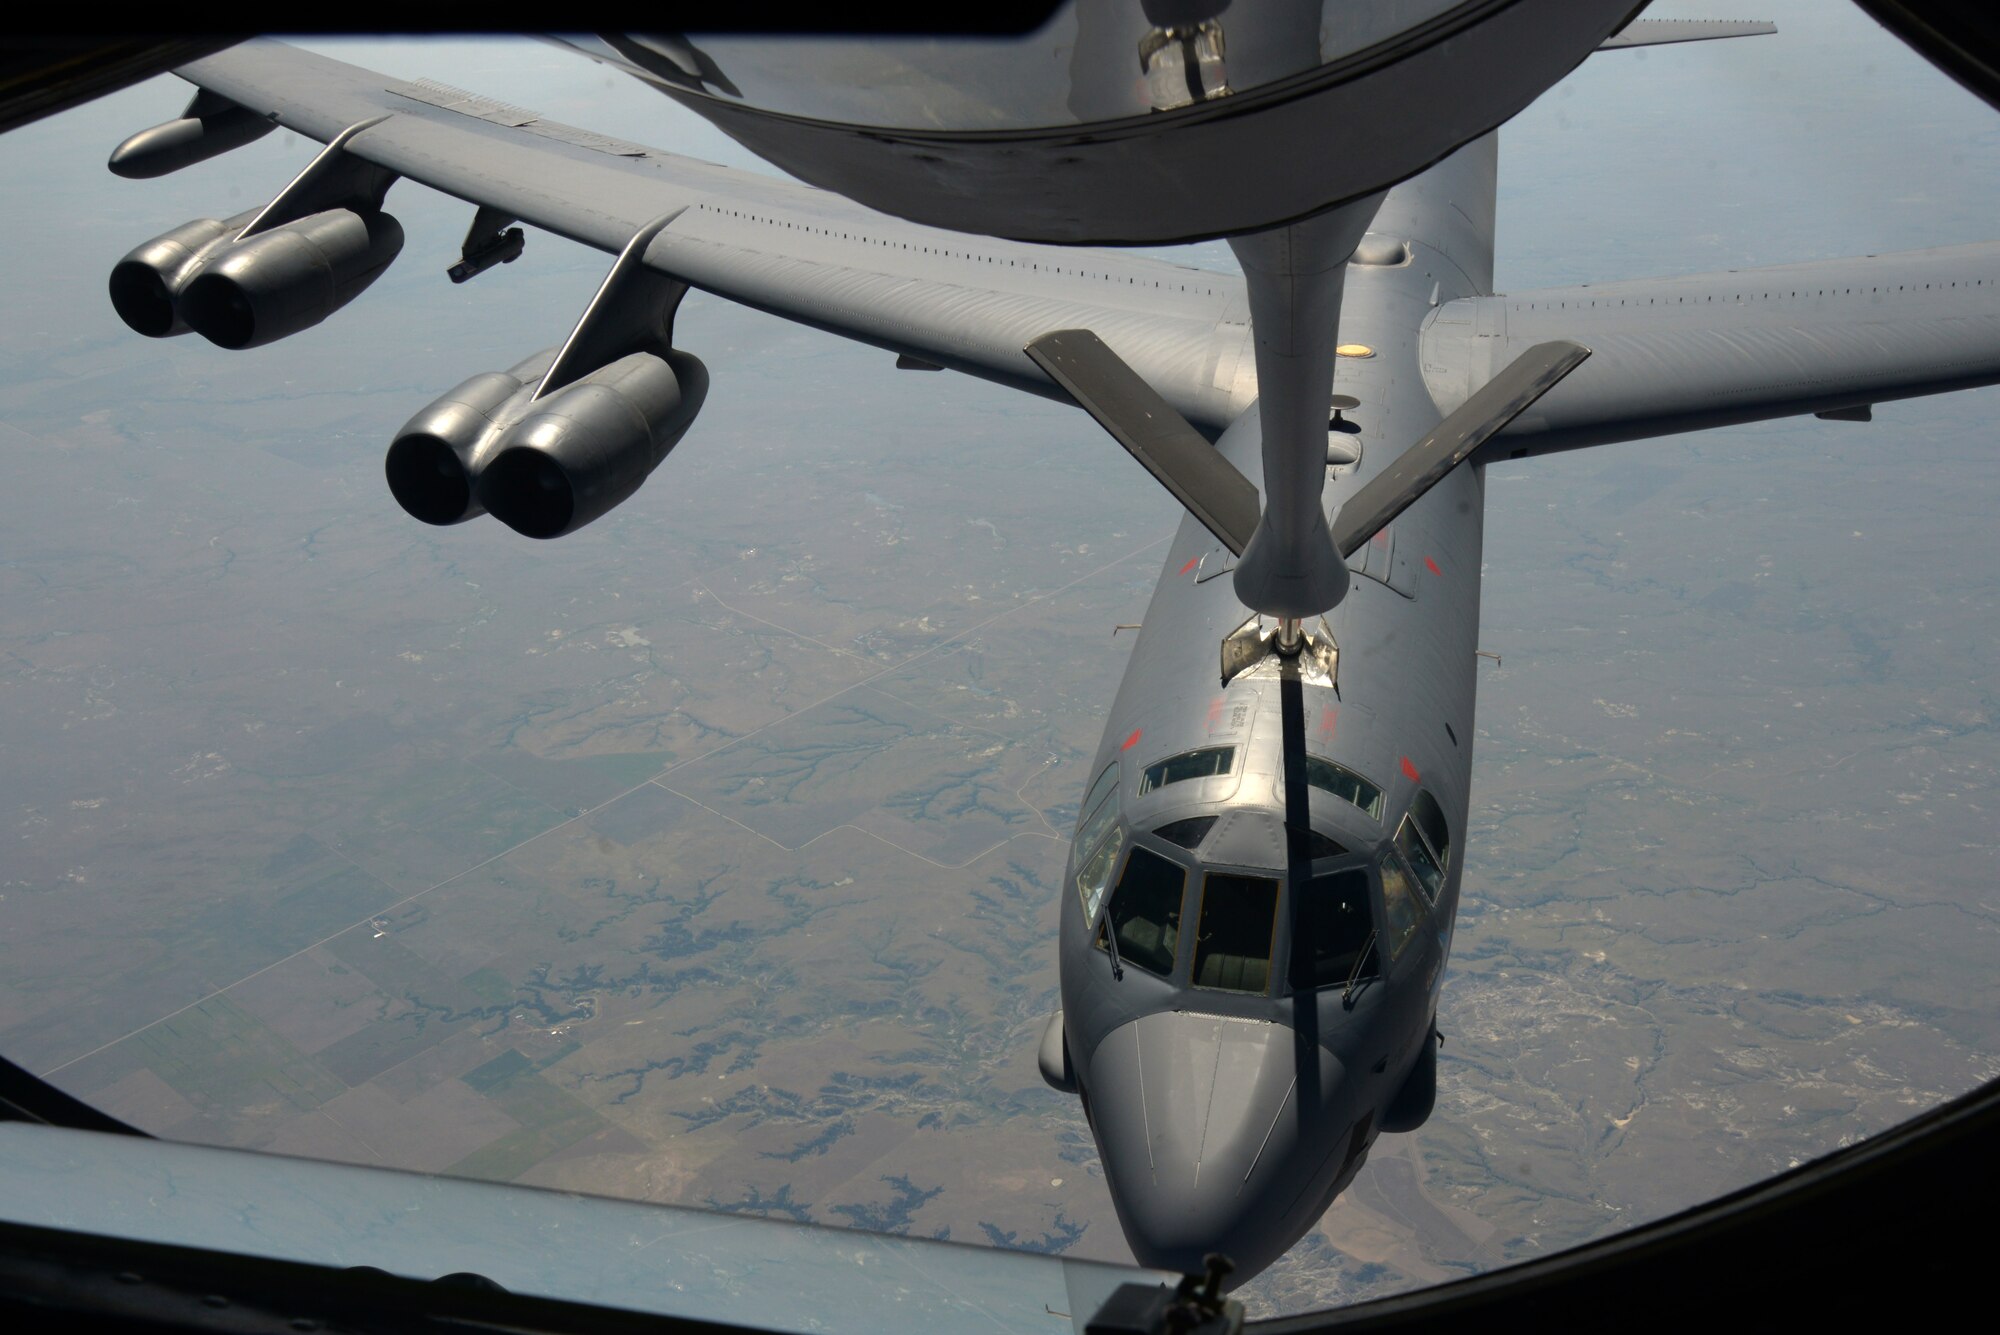 A KC-135 Stratotanker refuels a B-52 Stratofortress, above Minnesota, July 31, 2016. Four of McConnell's KC-135s assisted in refueling two B-52s to reach Polar Roar. Polar Roar is a mission in the Arctic Circle that demonstrates the ability to provide a flexible and vigilant long-range global-strike capability. (U.S. Air Force photo/Airman 1st Class Christopher Thornbury)